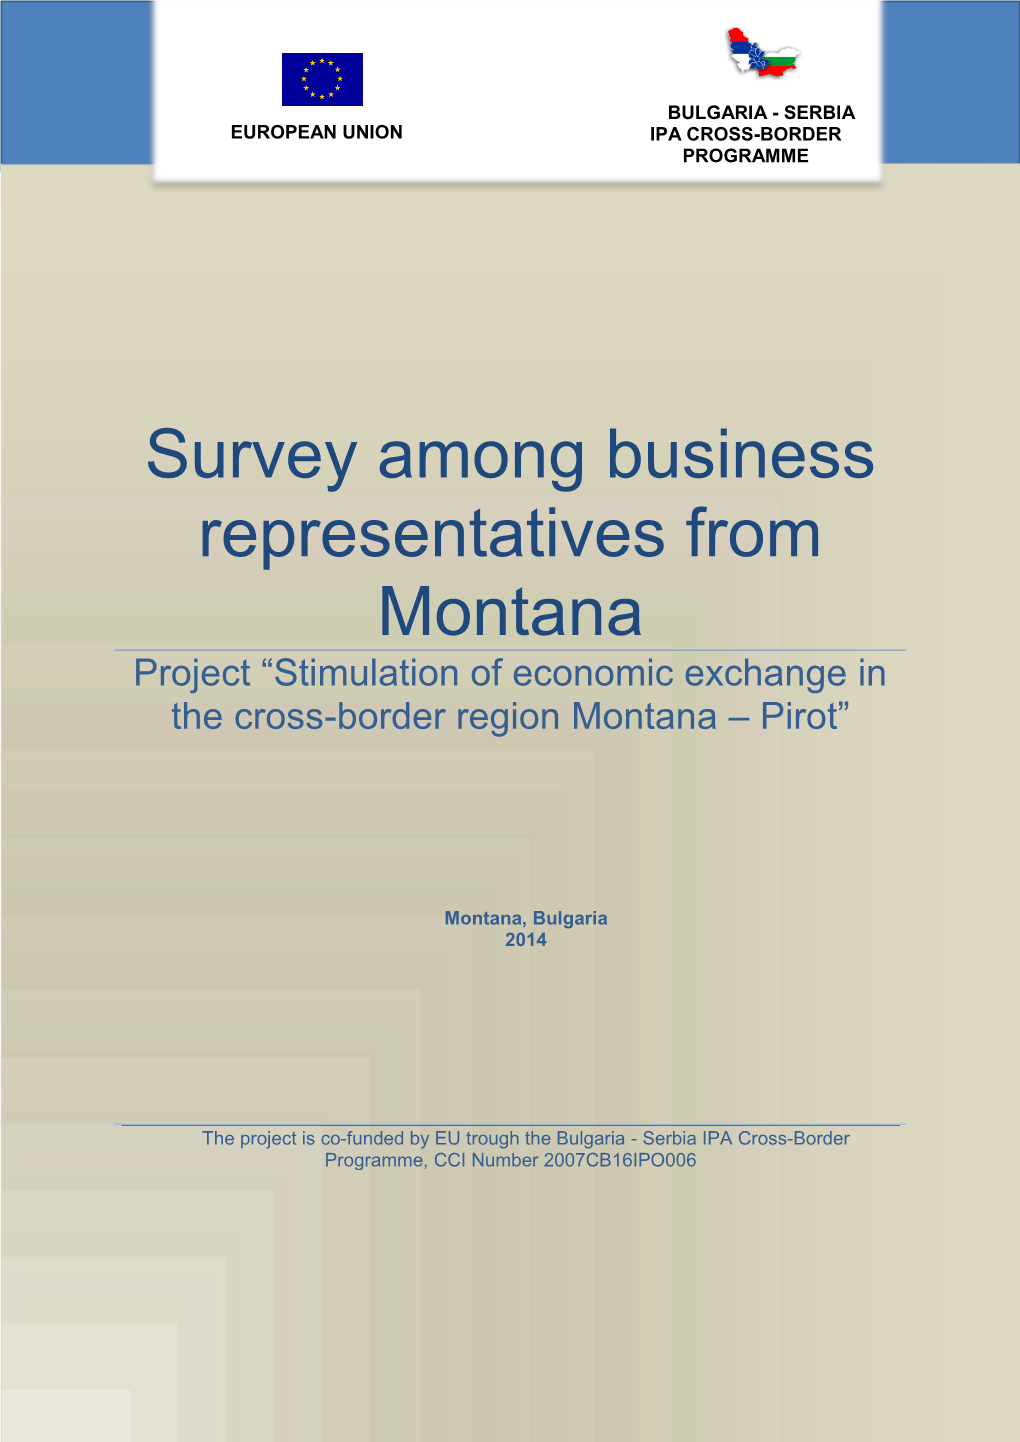 Survey Among Business Representatives from Montana Project “Stimulation of Economic Exchange in the Cross-Border Region Montana – Pirot”